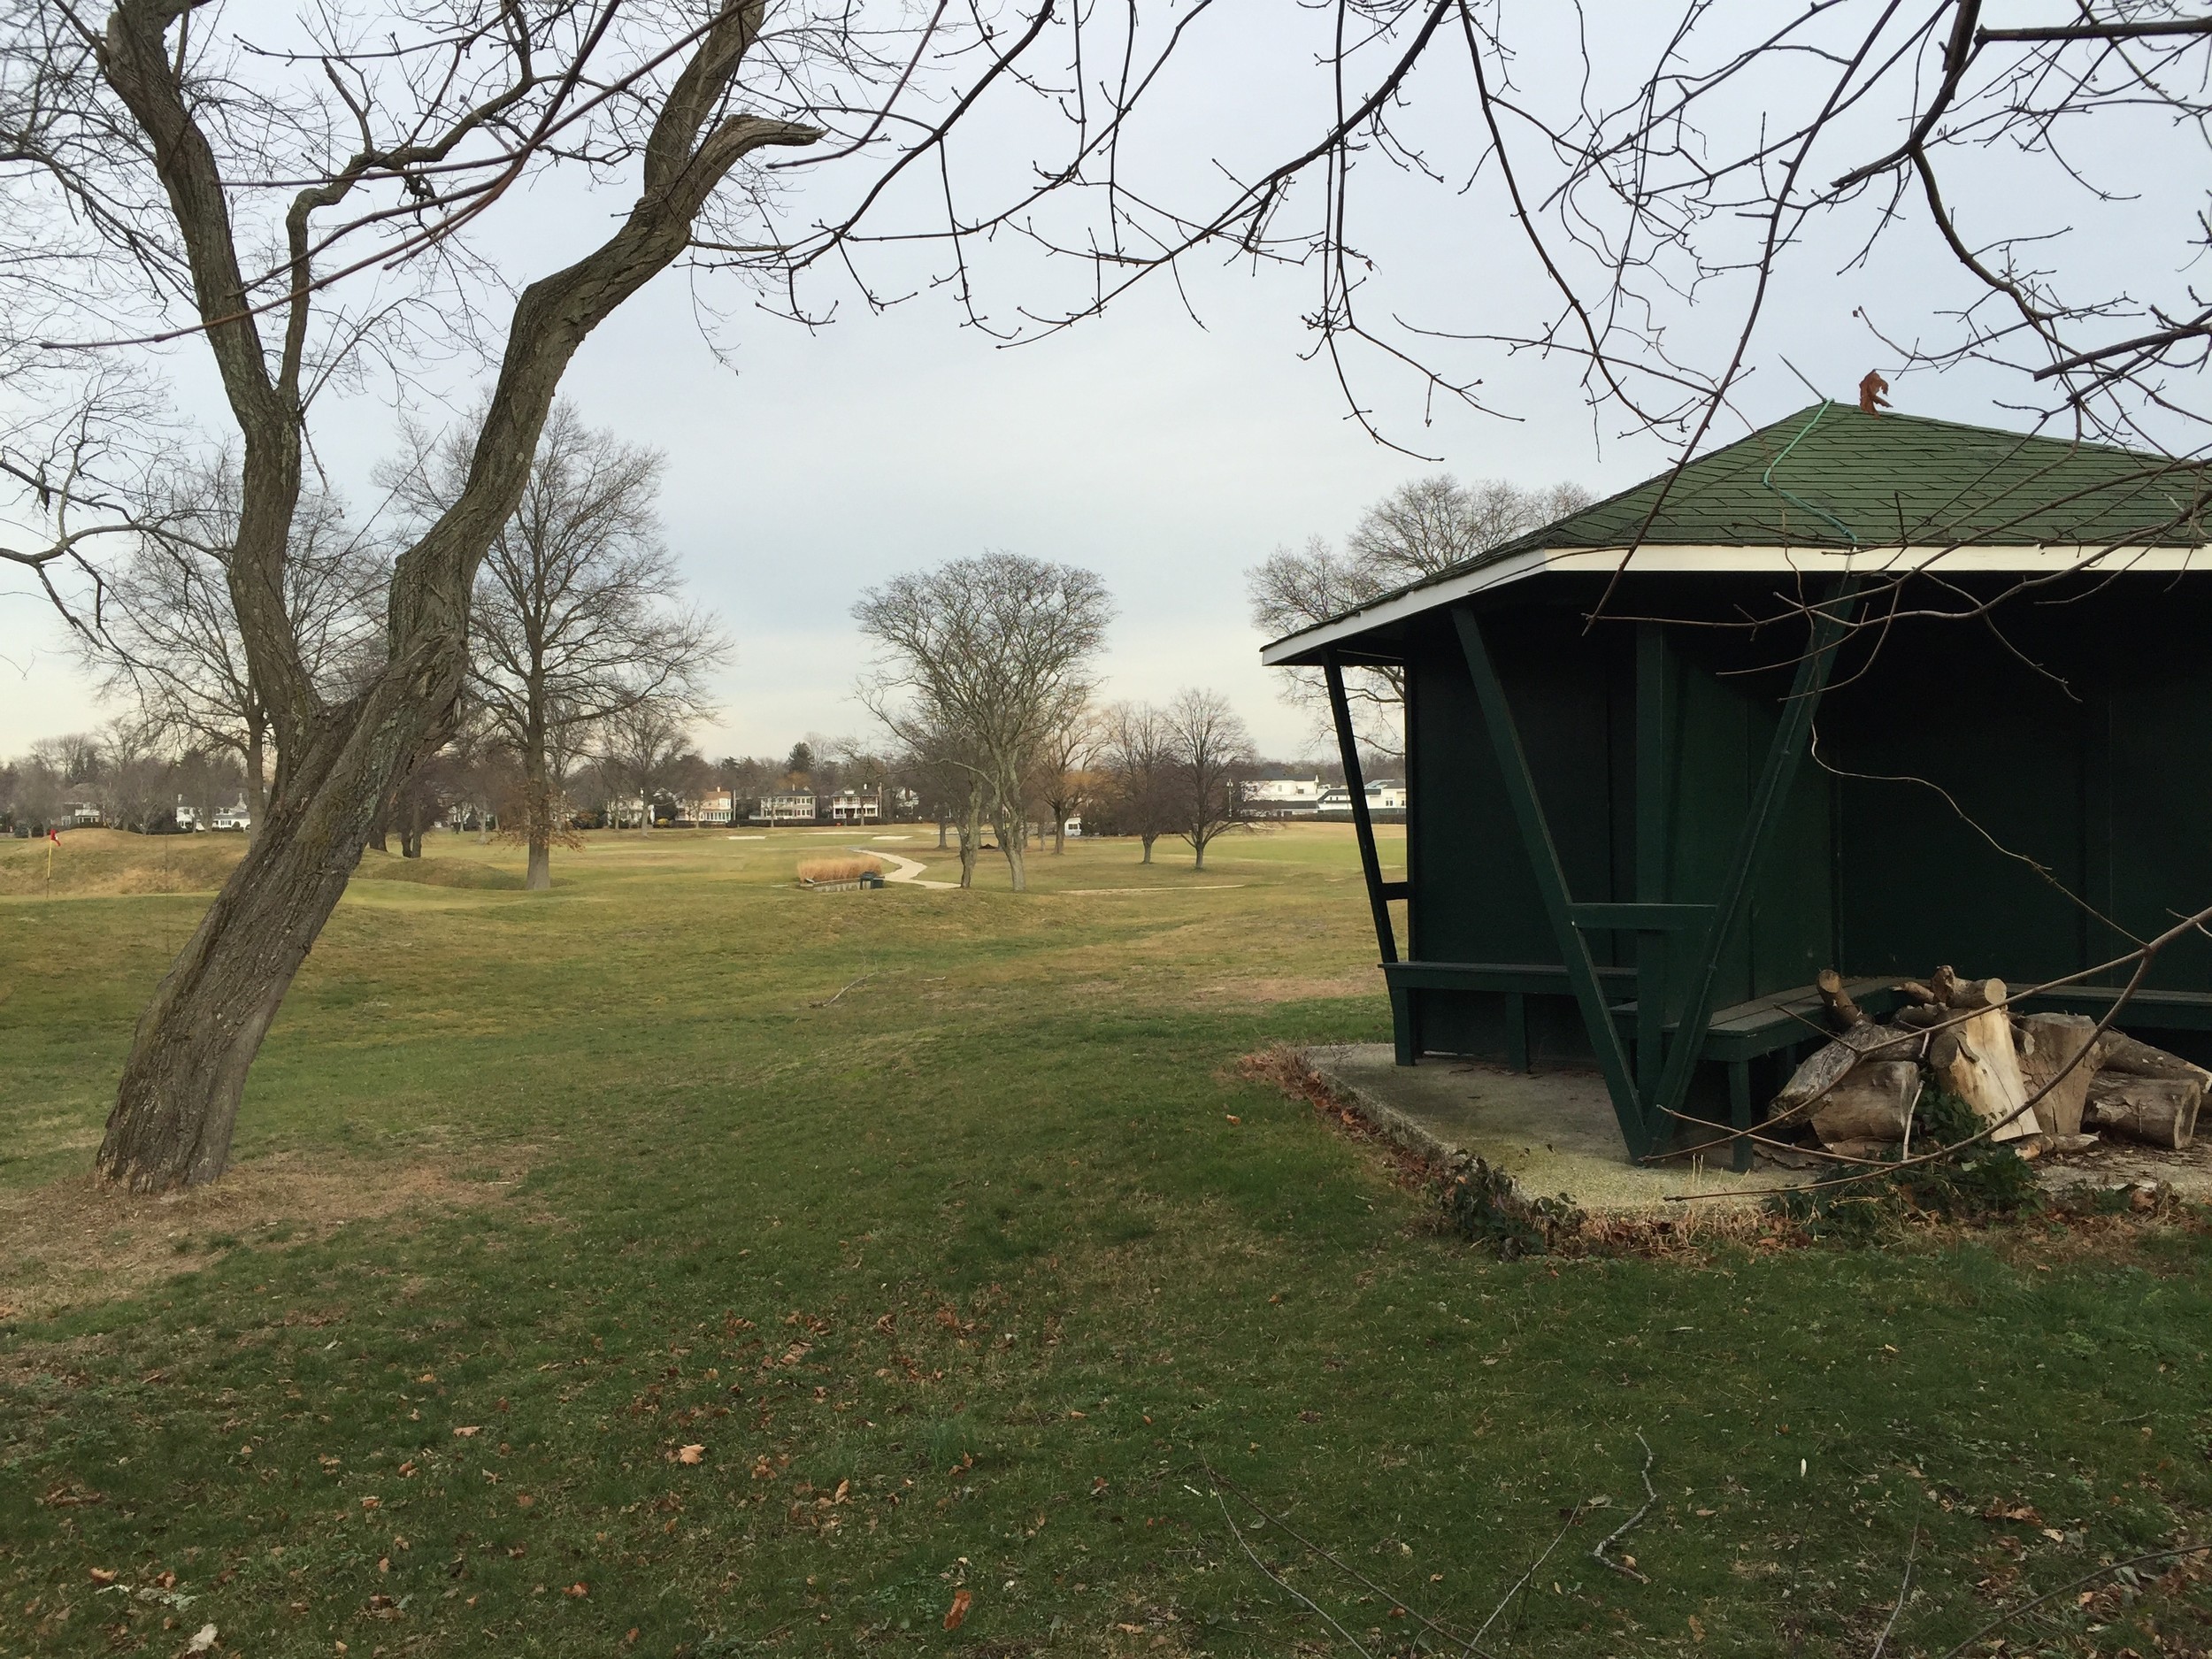 The golf course view Rose Street residents in Cedarhurst would lose if the Woodmere Club’s land were developed for homes.